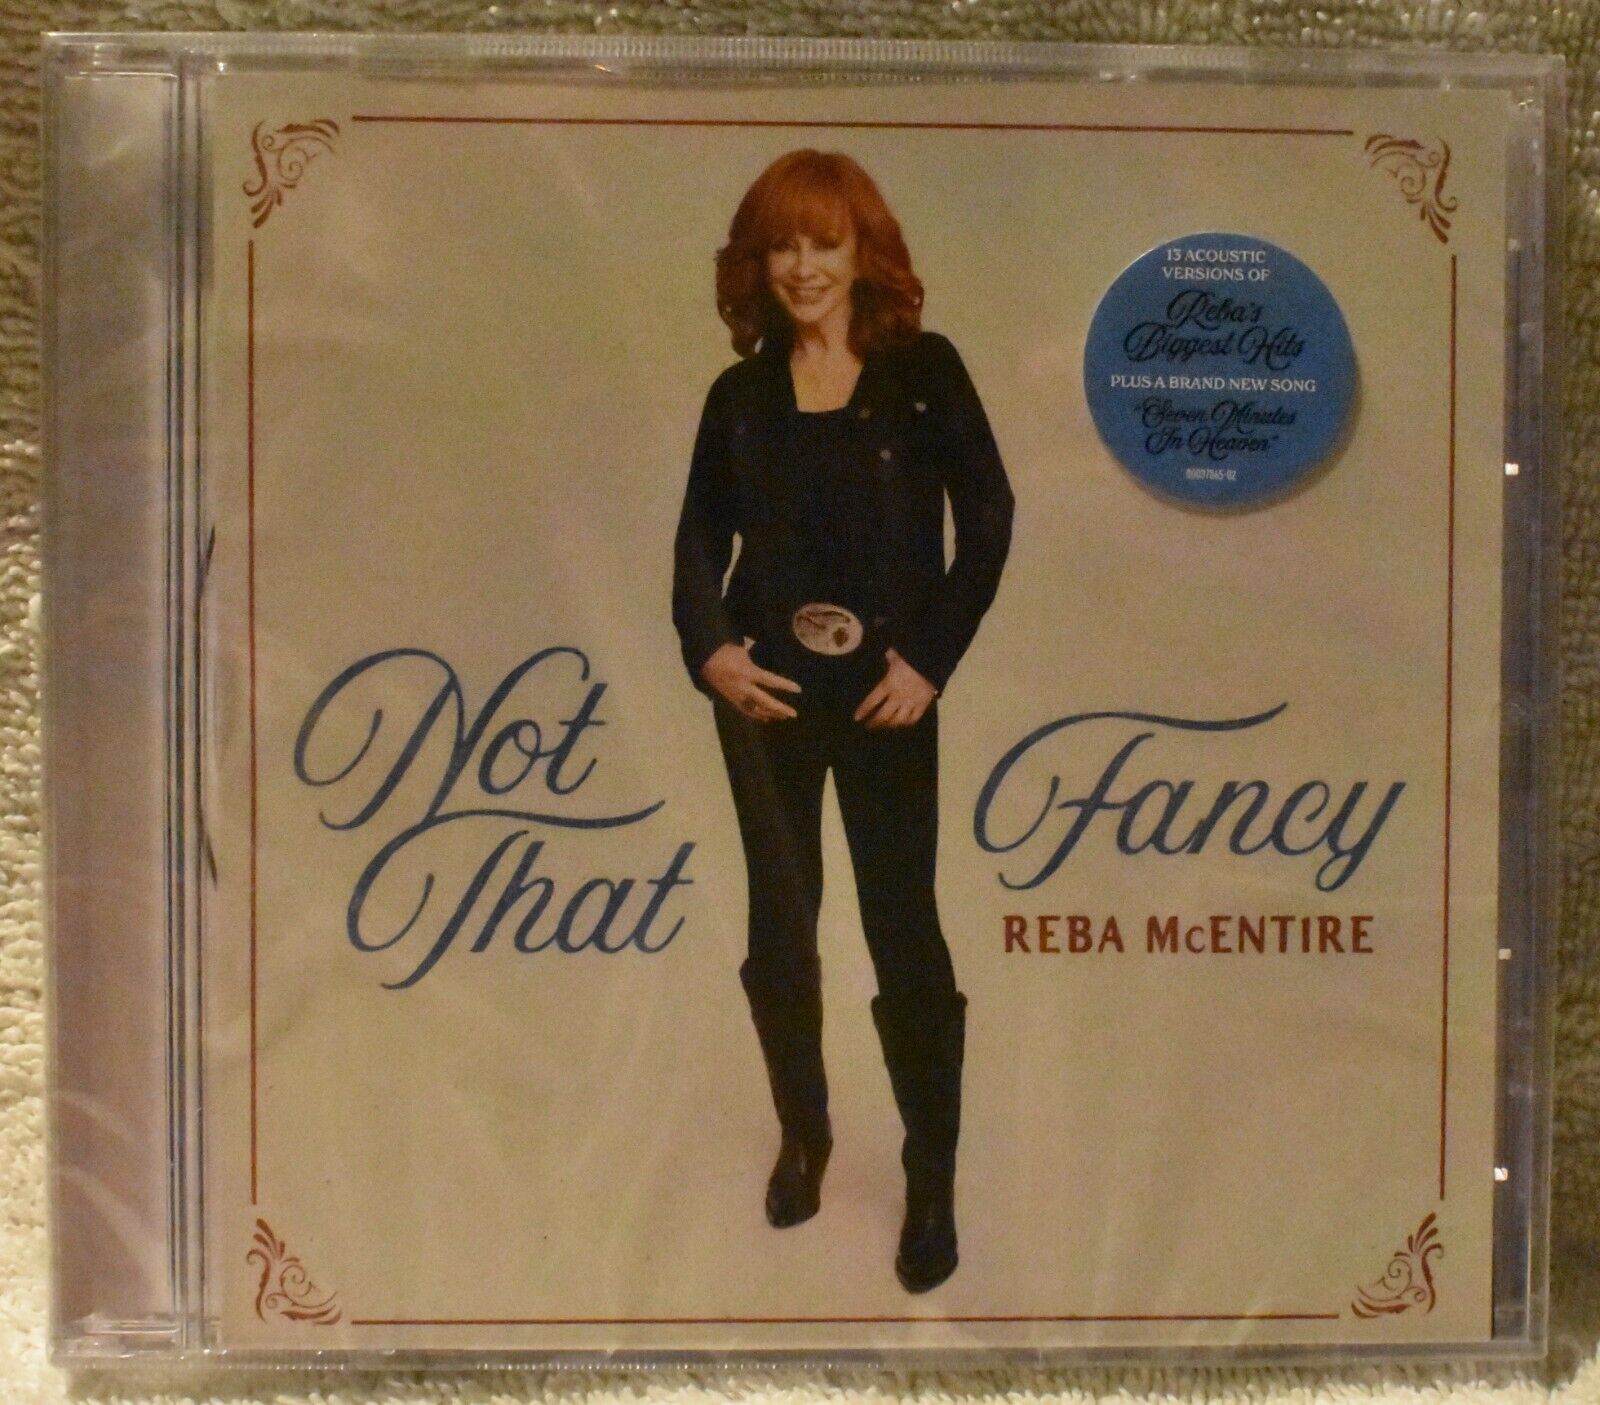 REBA MCENTIRE - NOT THAT FANCY - ACOUSTIC VERSION GREATEST HITS - NEW SEALED CD